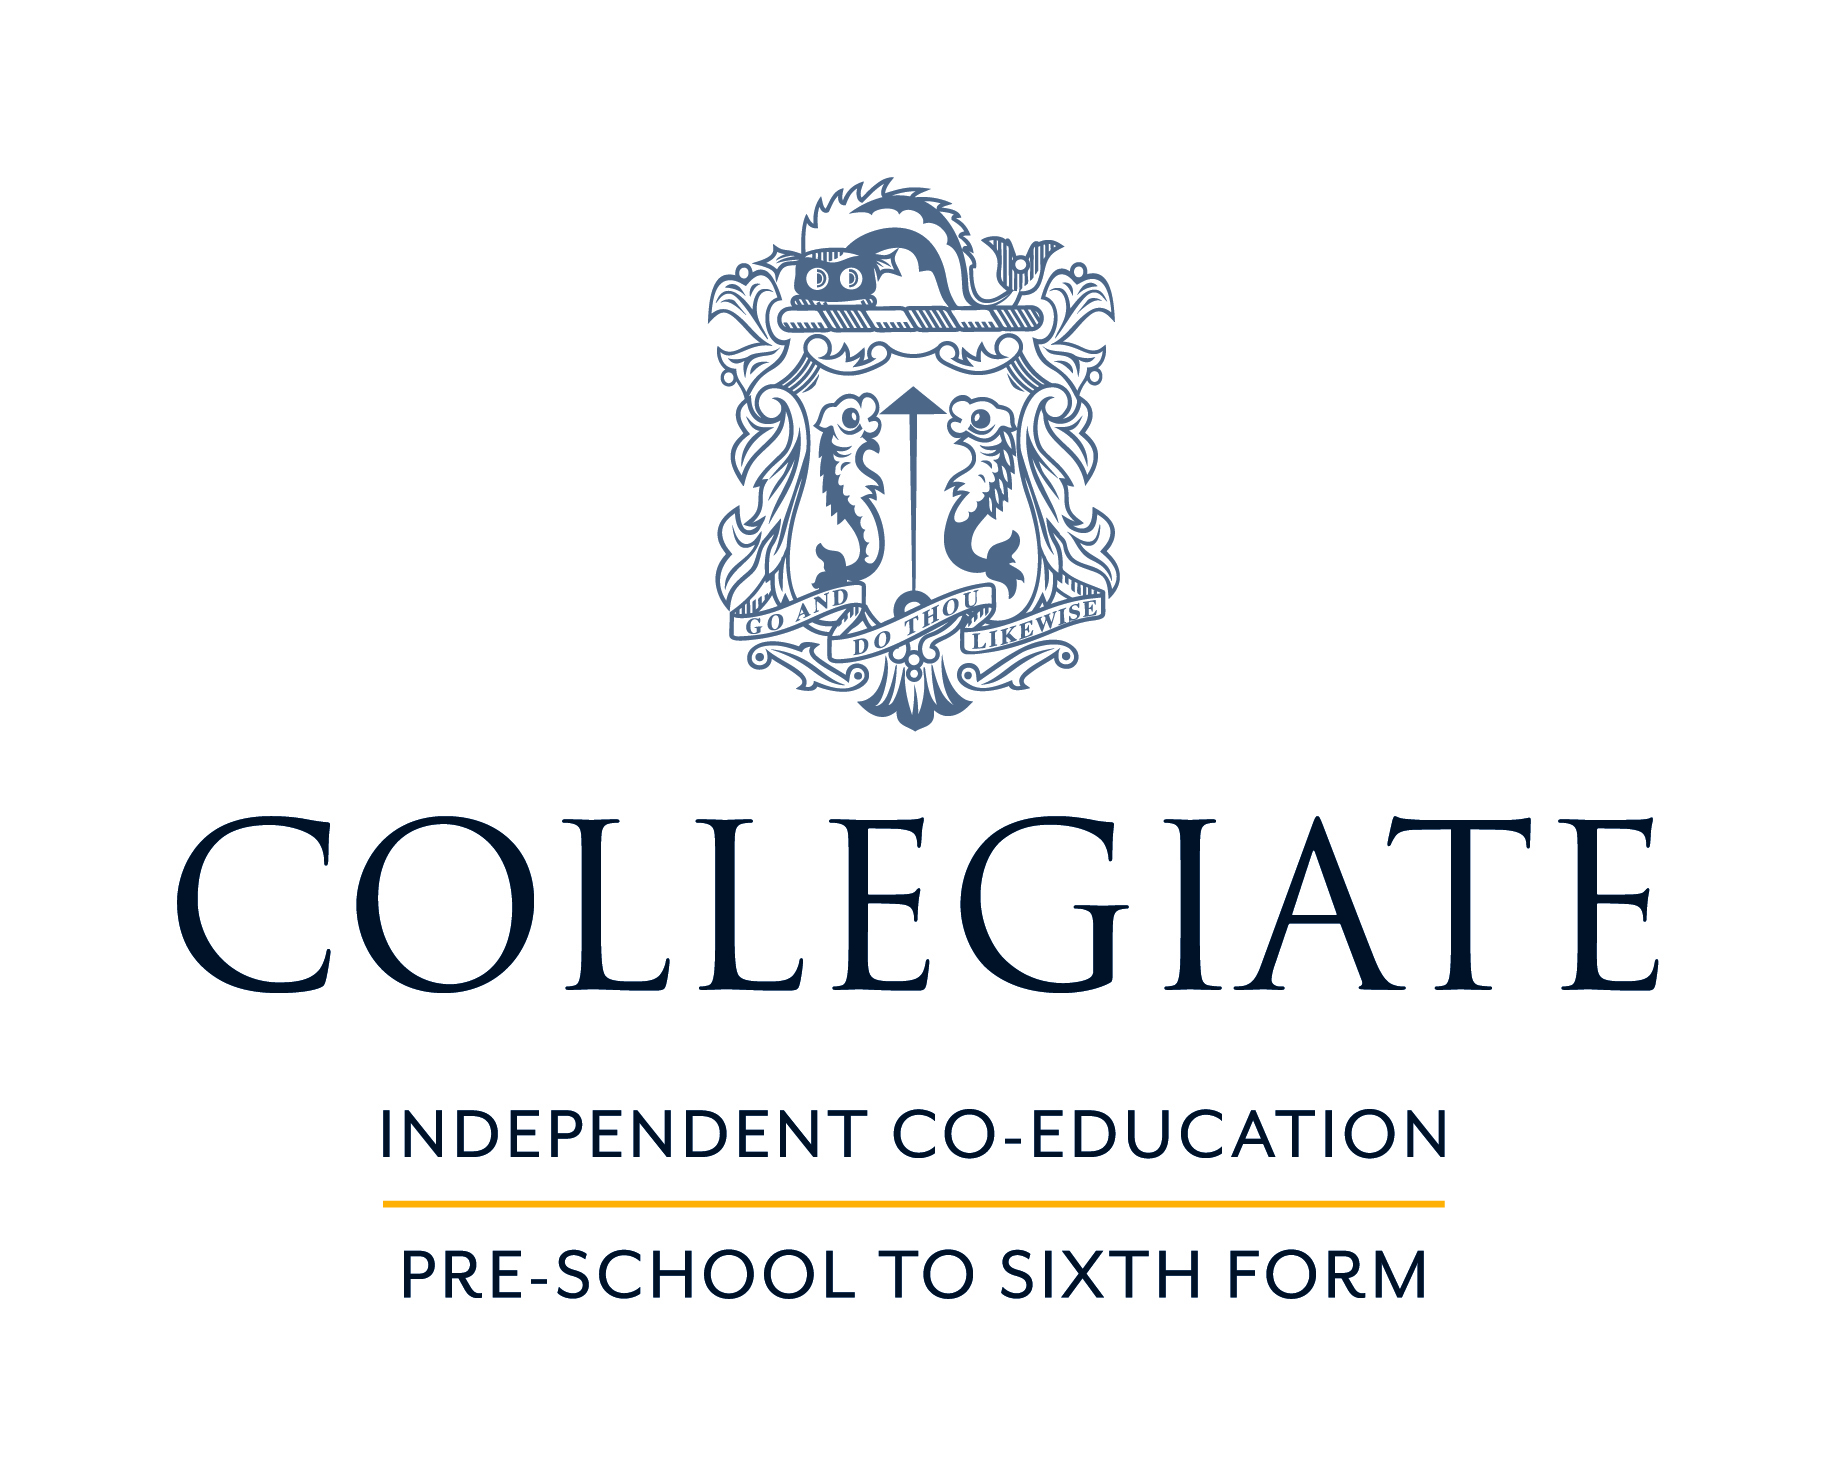 Collegiate School Bristol with crest and writing